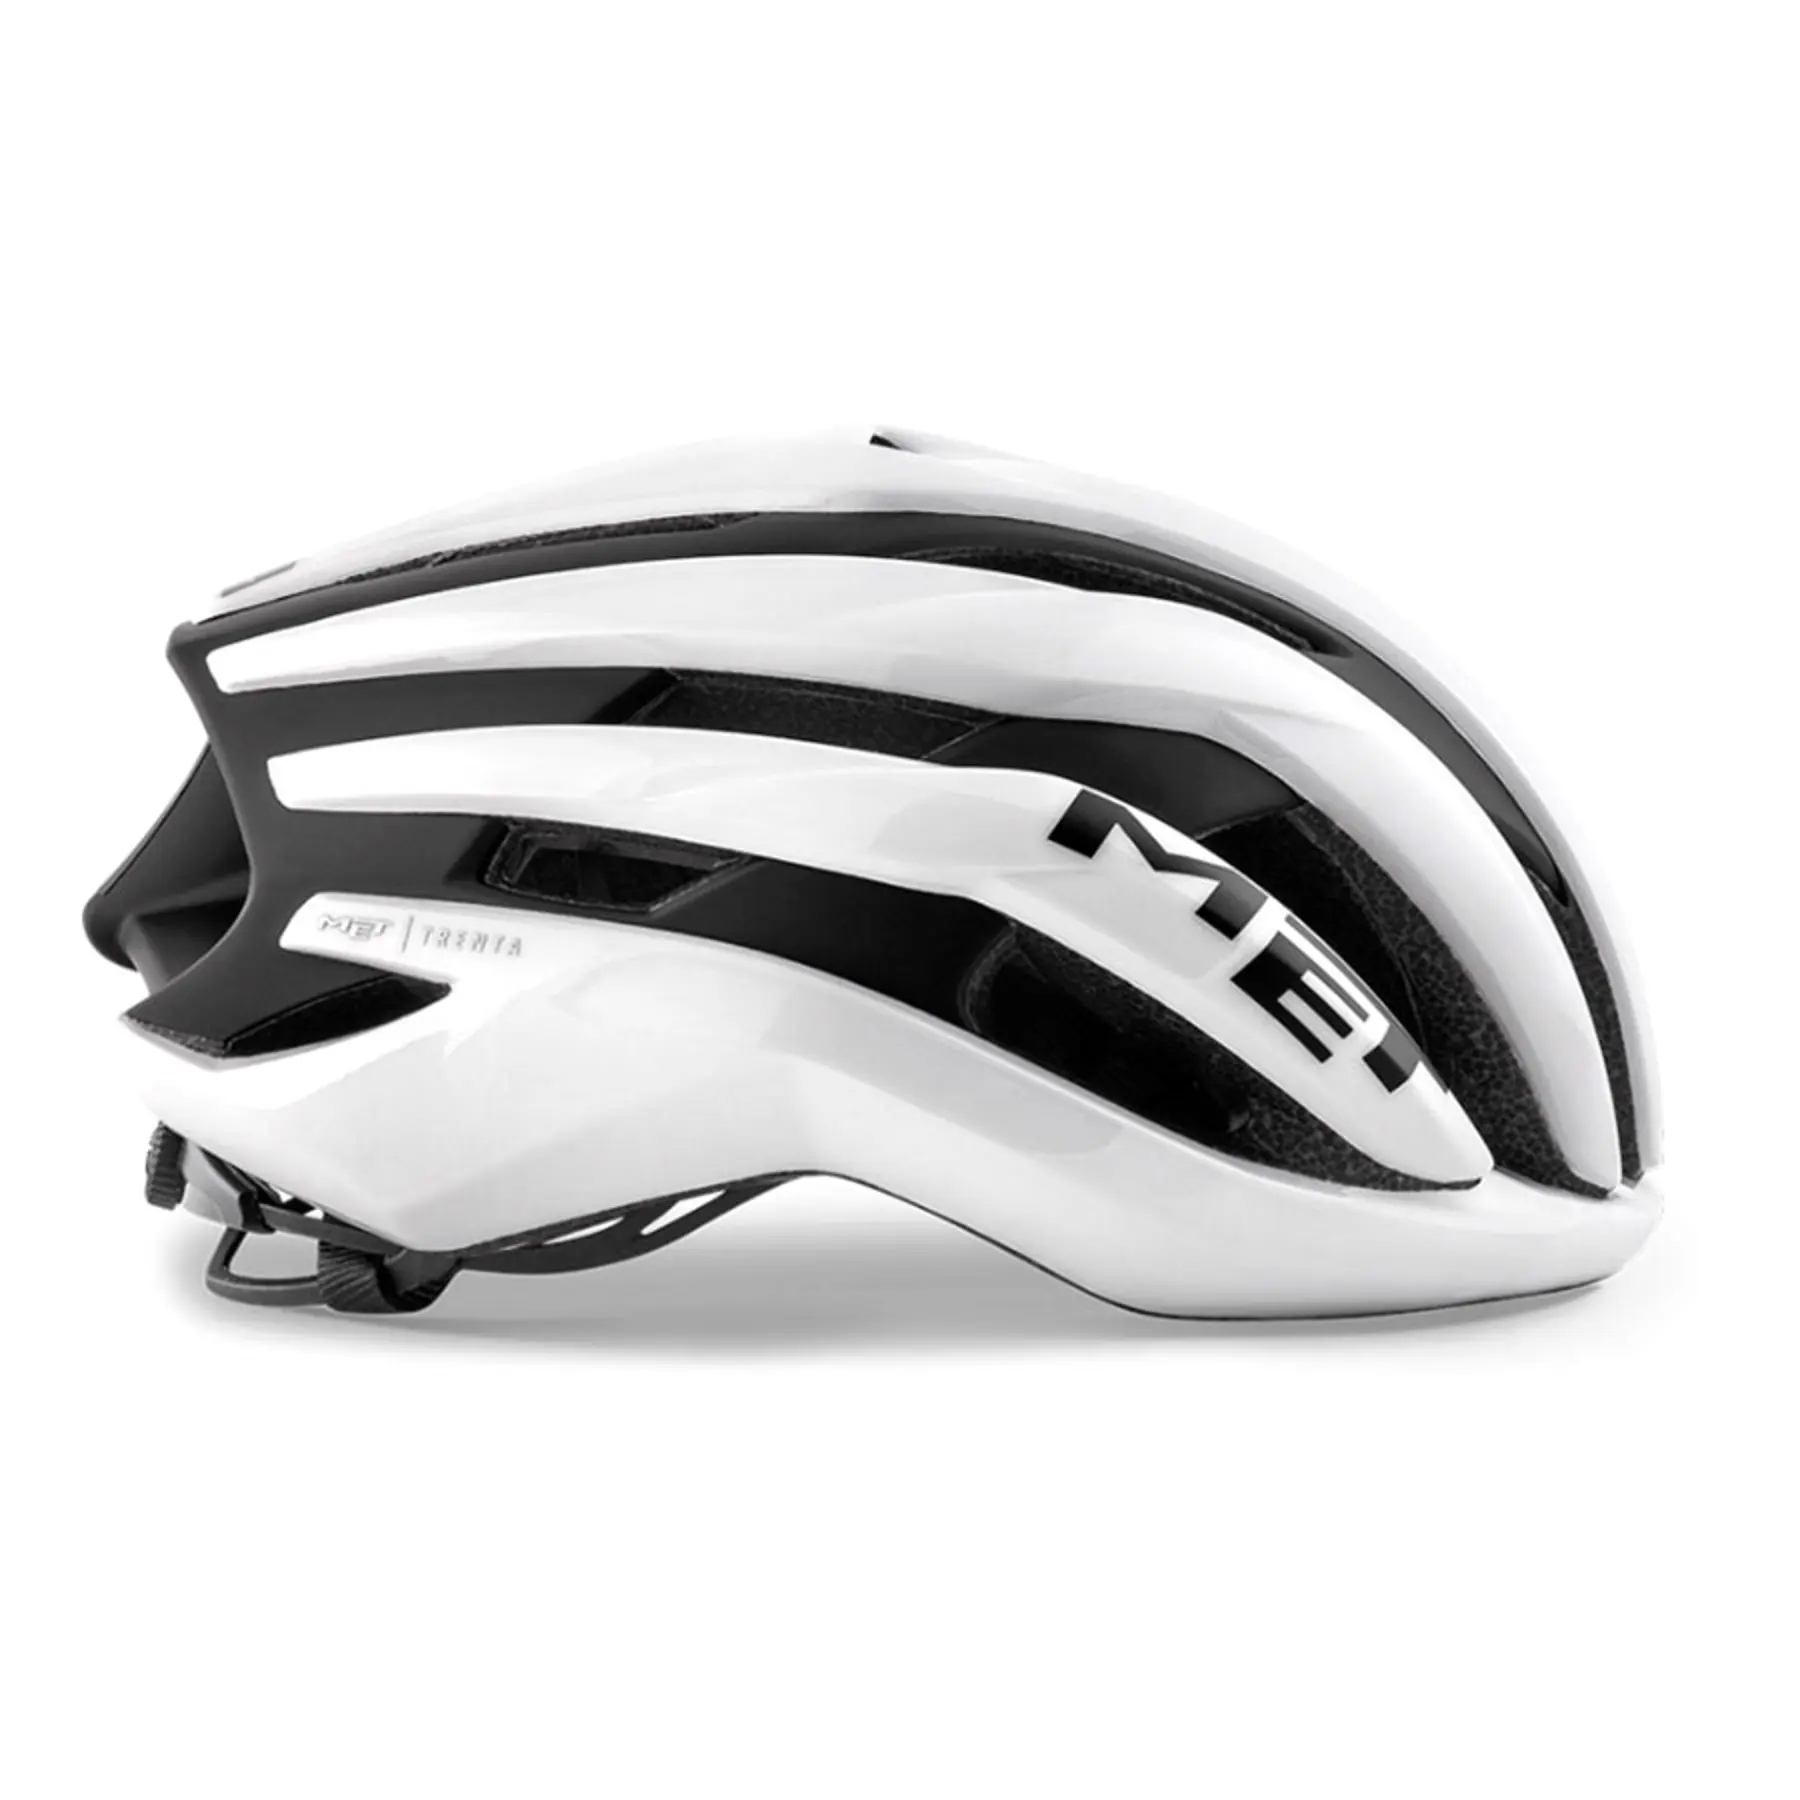 Casco MET Trenta Mips Blanco - Maillot Cycling Boutique Ciclismo